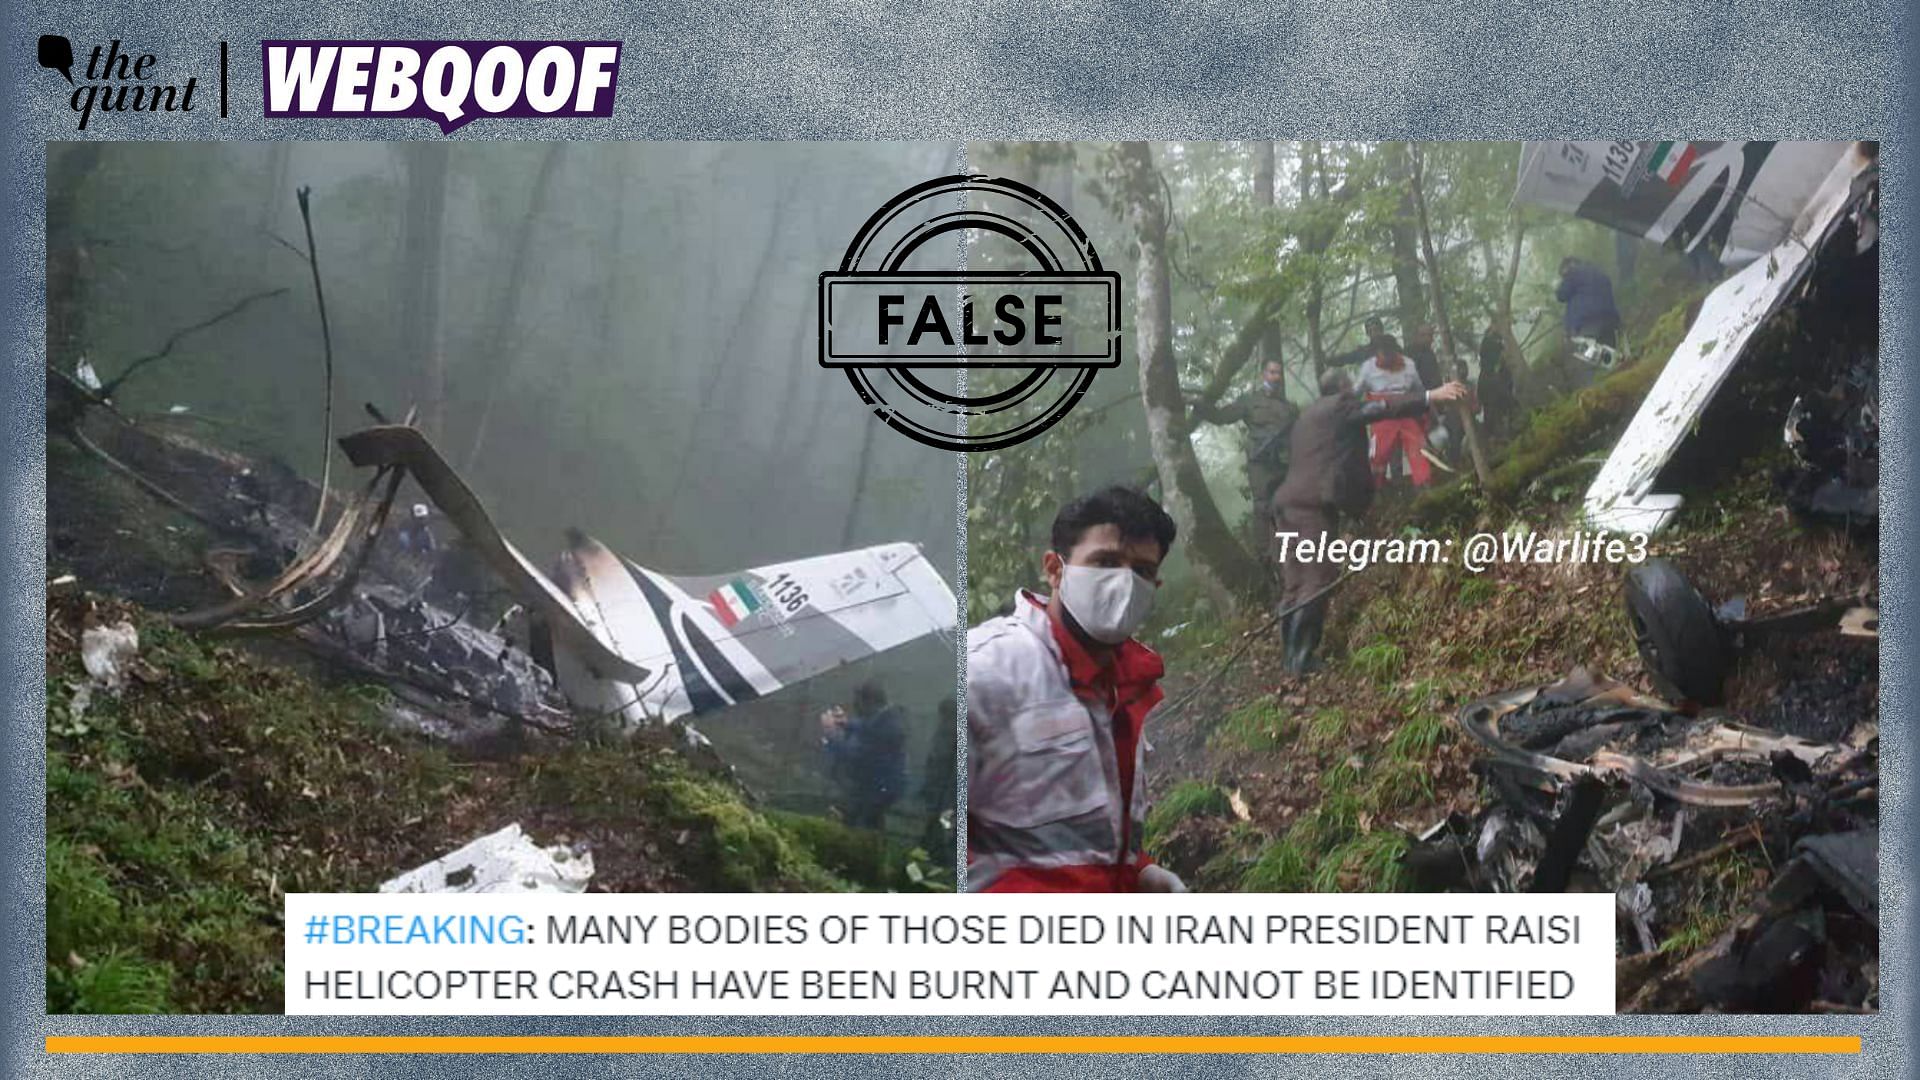 <div class="paragraphs"><p>Fact-Check | The images are old and unrelated to the recent helicopter crash.</p></div>